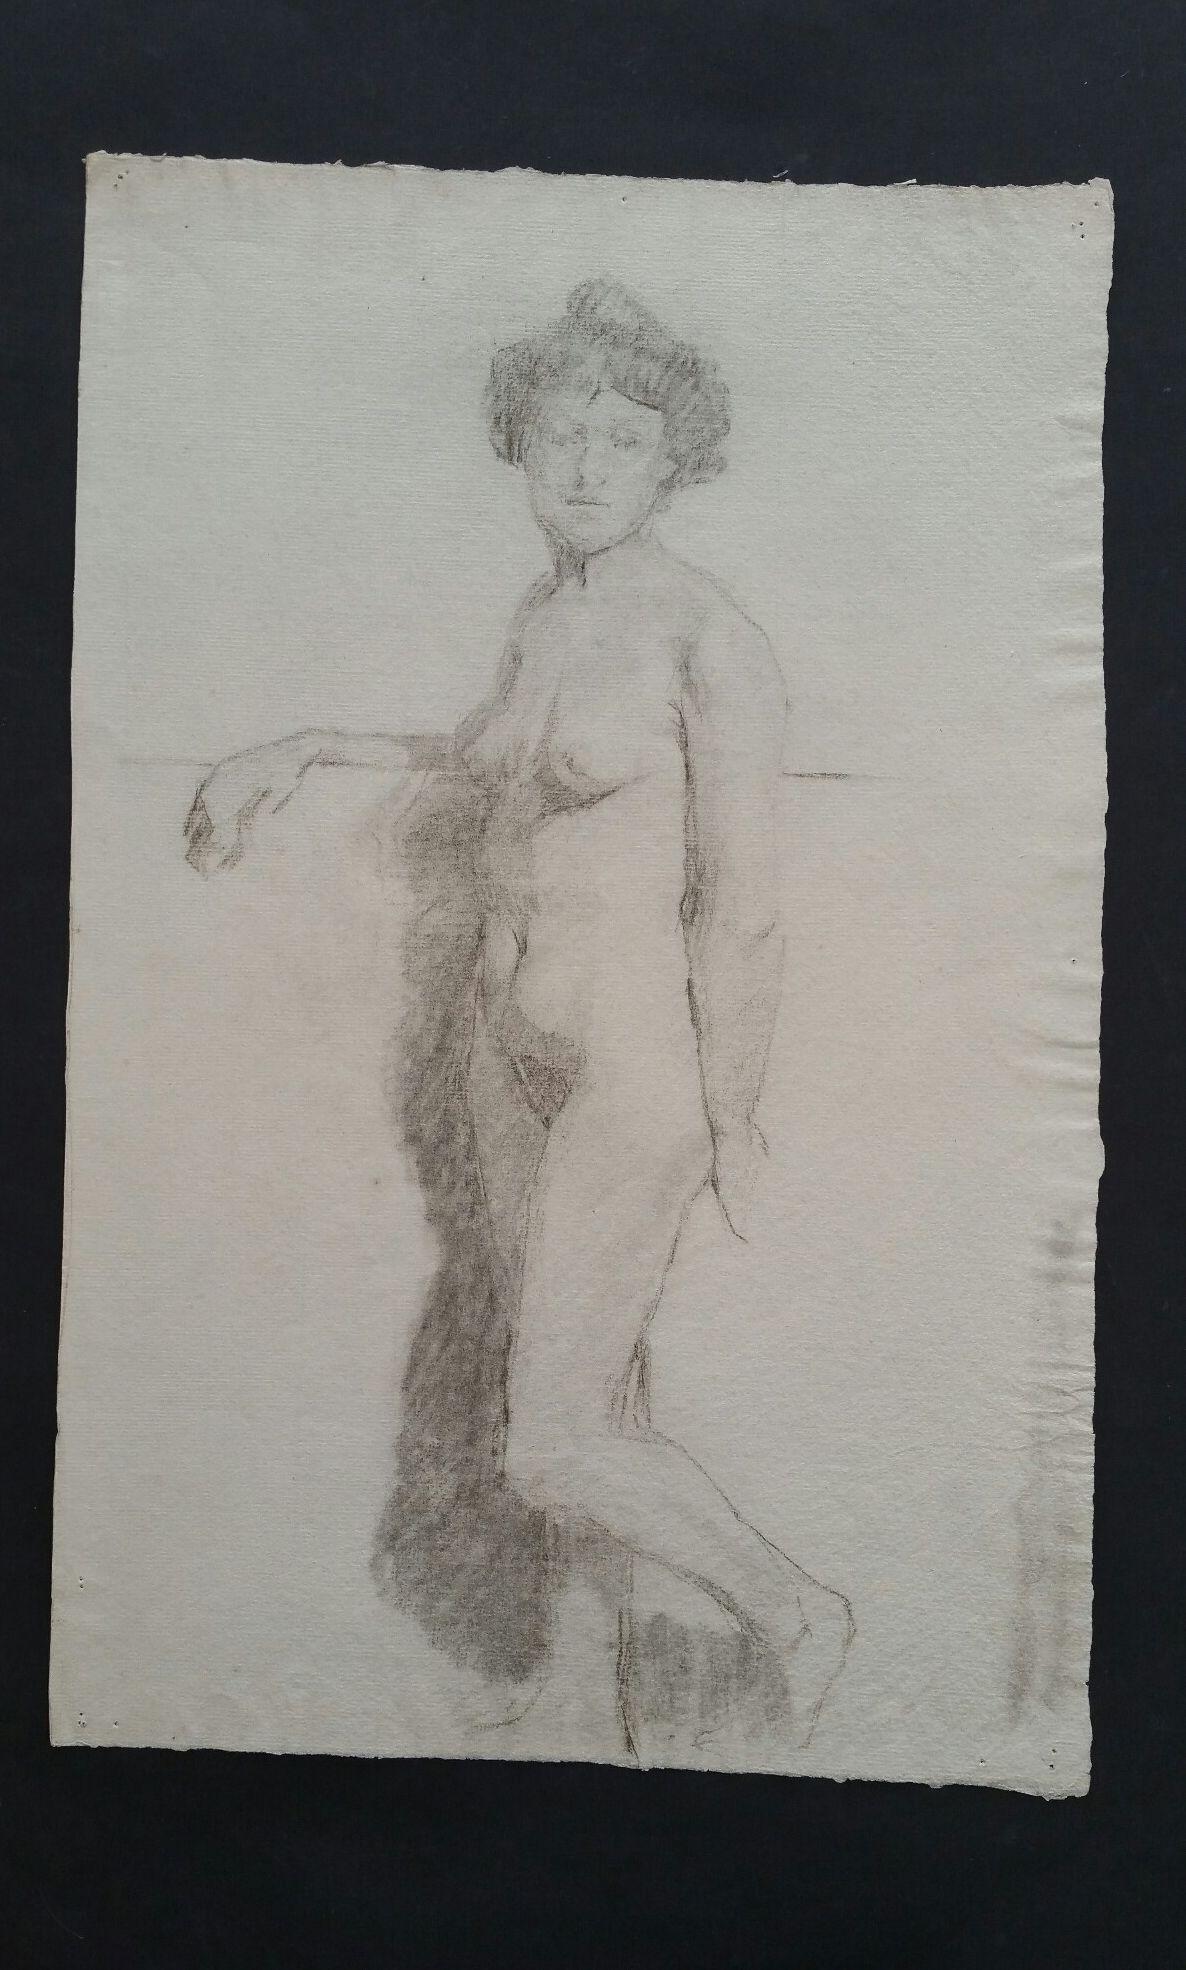 English Graphite Sketch of a Female Nude, Standing
by Henry George Moon (British 1857-1905)
on pale grey artists paper, unframed
measurements: sheet 18.5 x 12 inches 

provenance: from the artists estate

Condition report: pin holes to